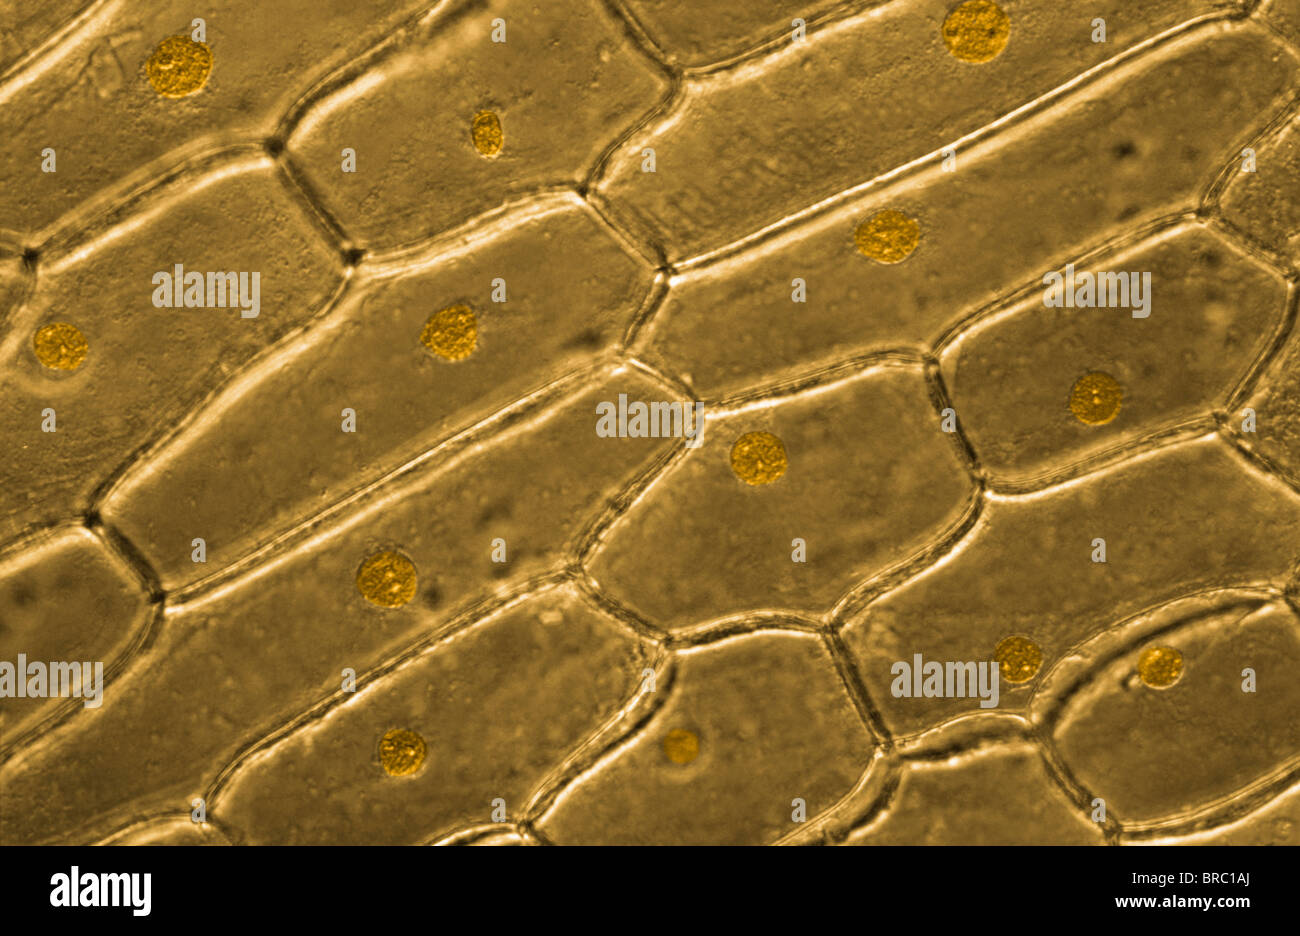 Light Micrograph (LM) of onion skin cells, magnification x 600 Stock Photo